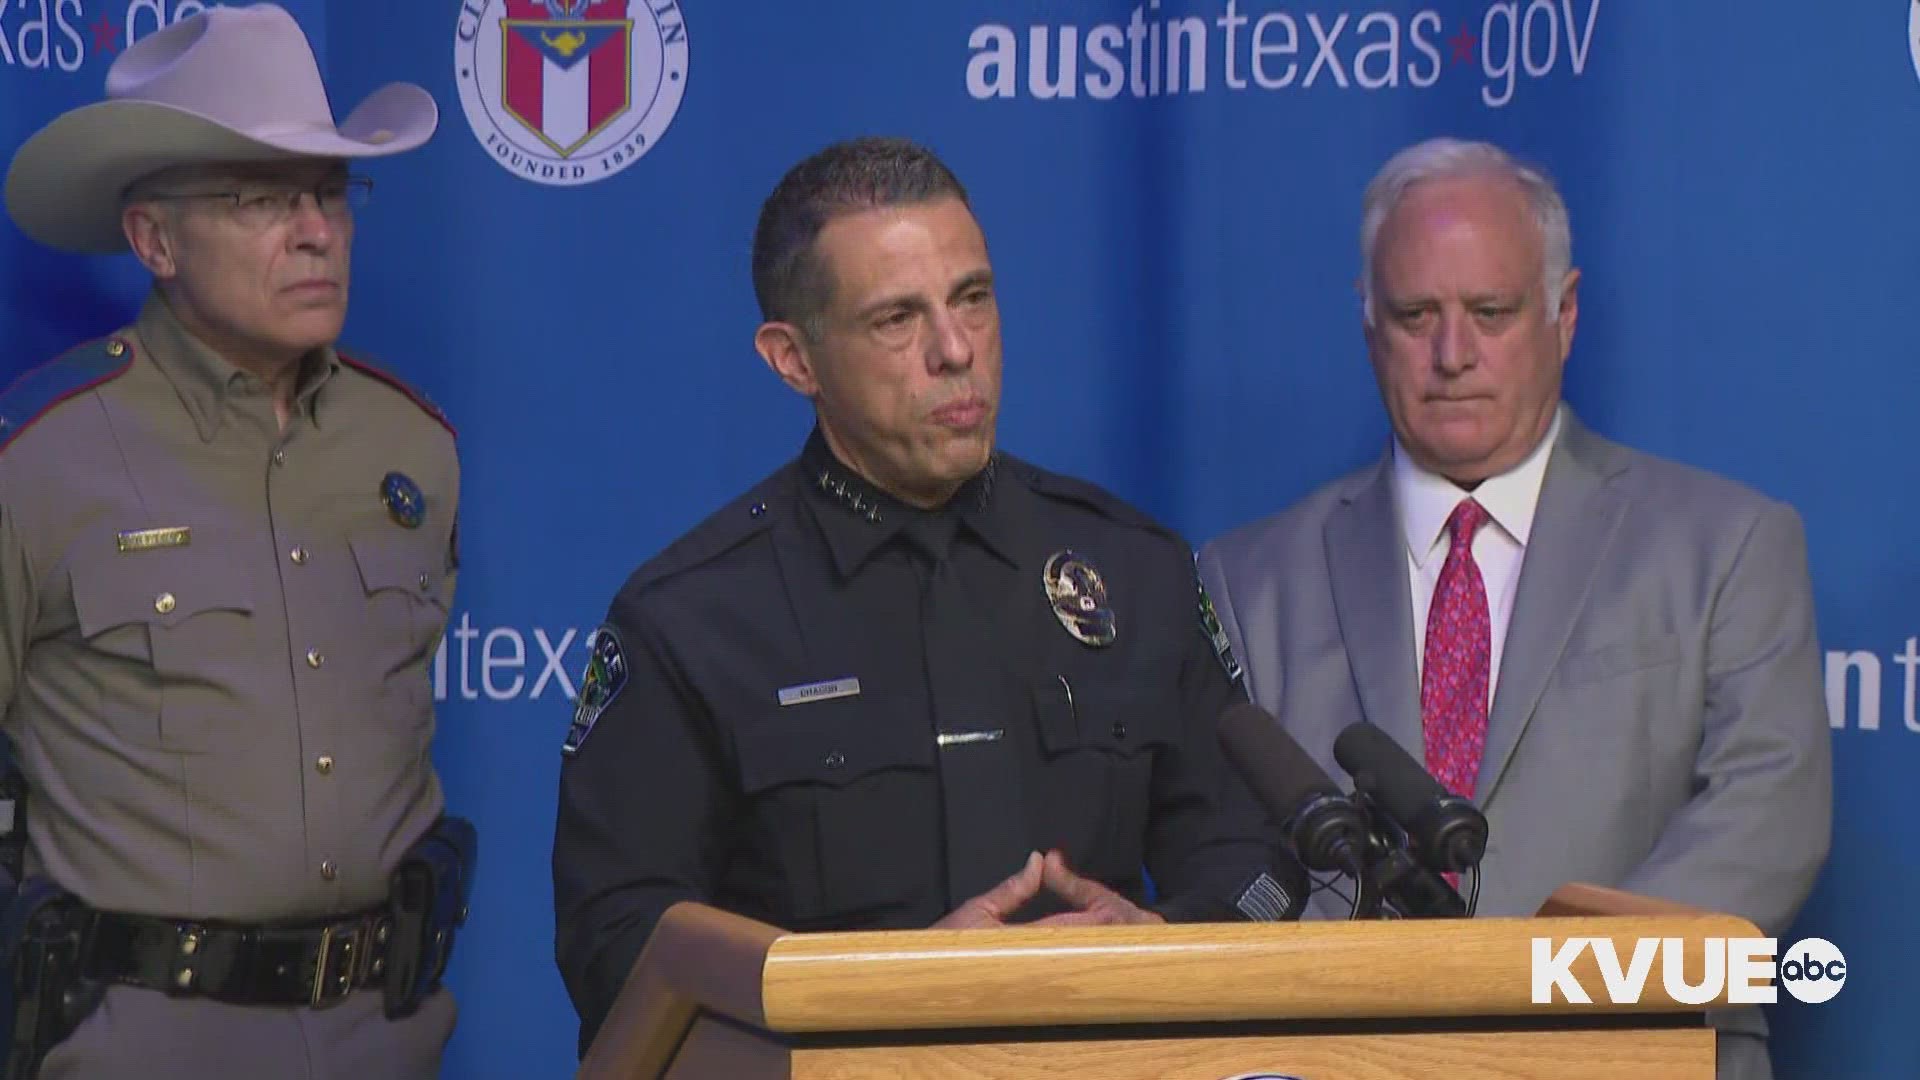 Austin leaders are holding a conference to discuss how they are keeping Austin safe amid the police's staffing shortages.